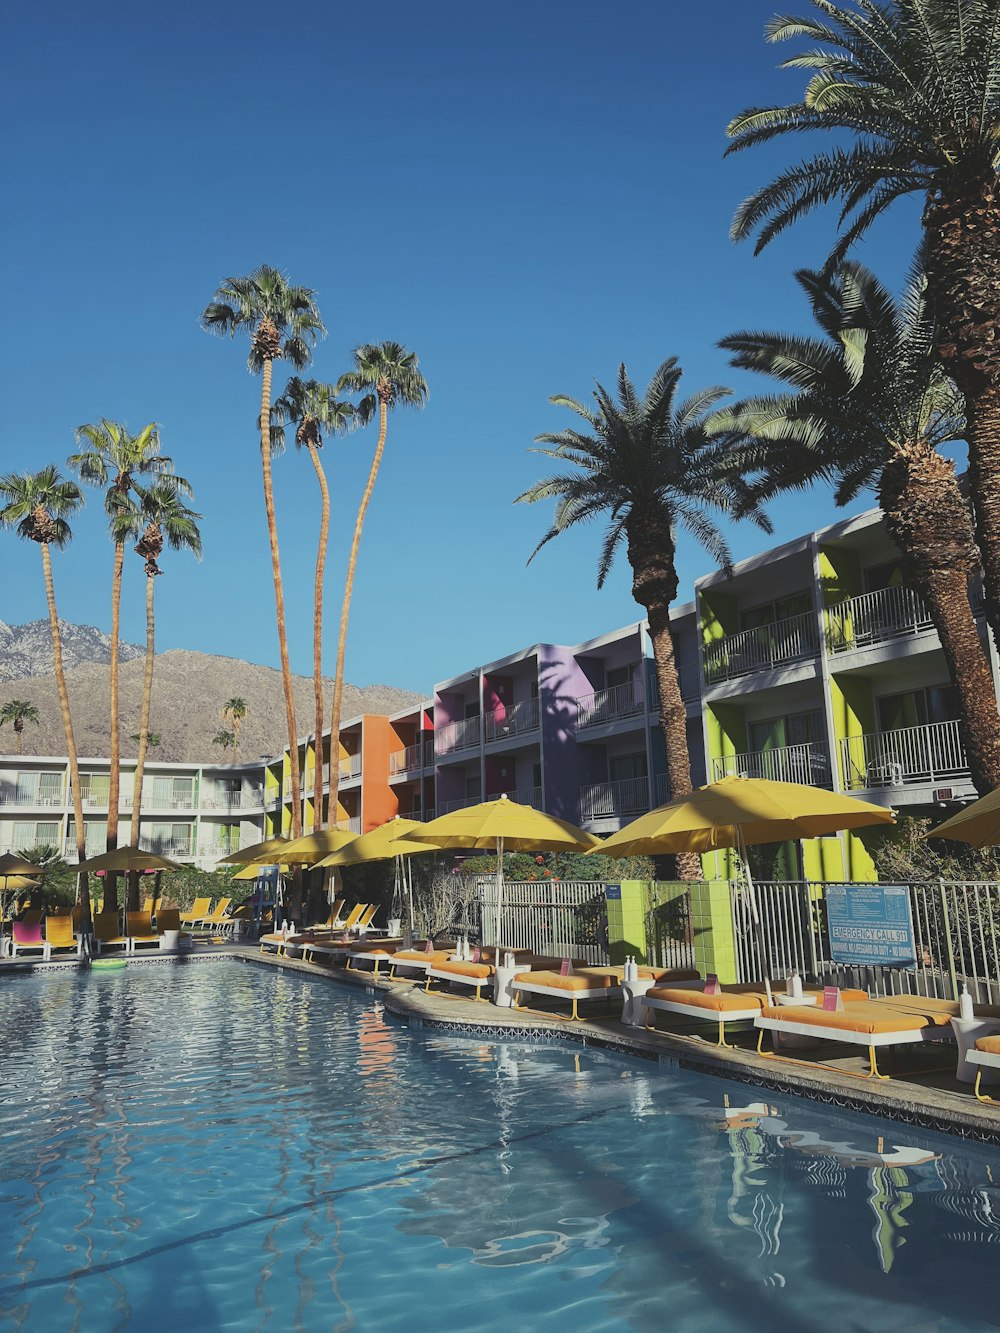 a pool with lounge chairs and umbrellas by a building with palm trees